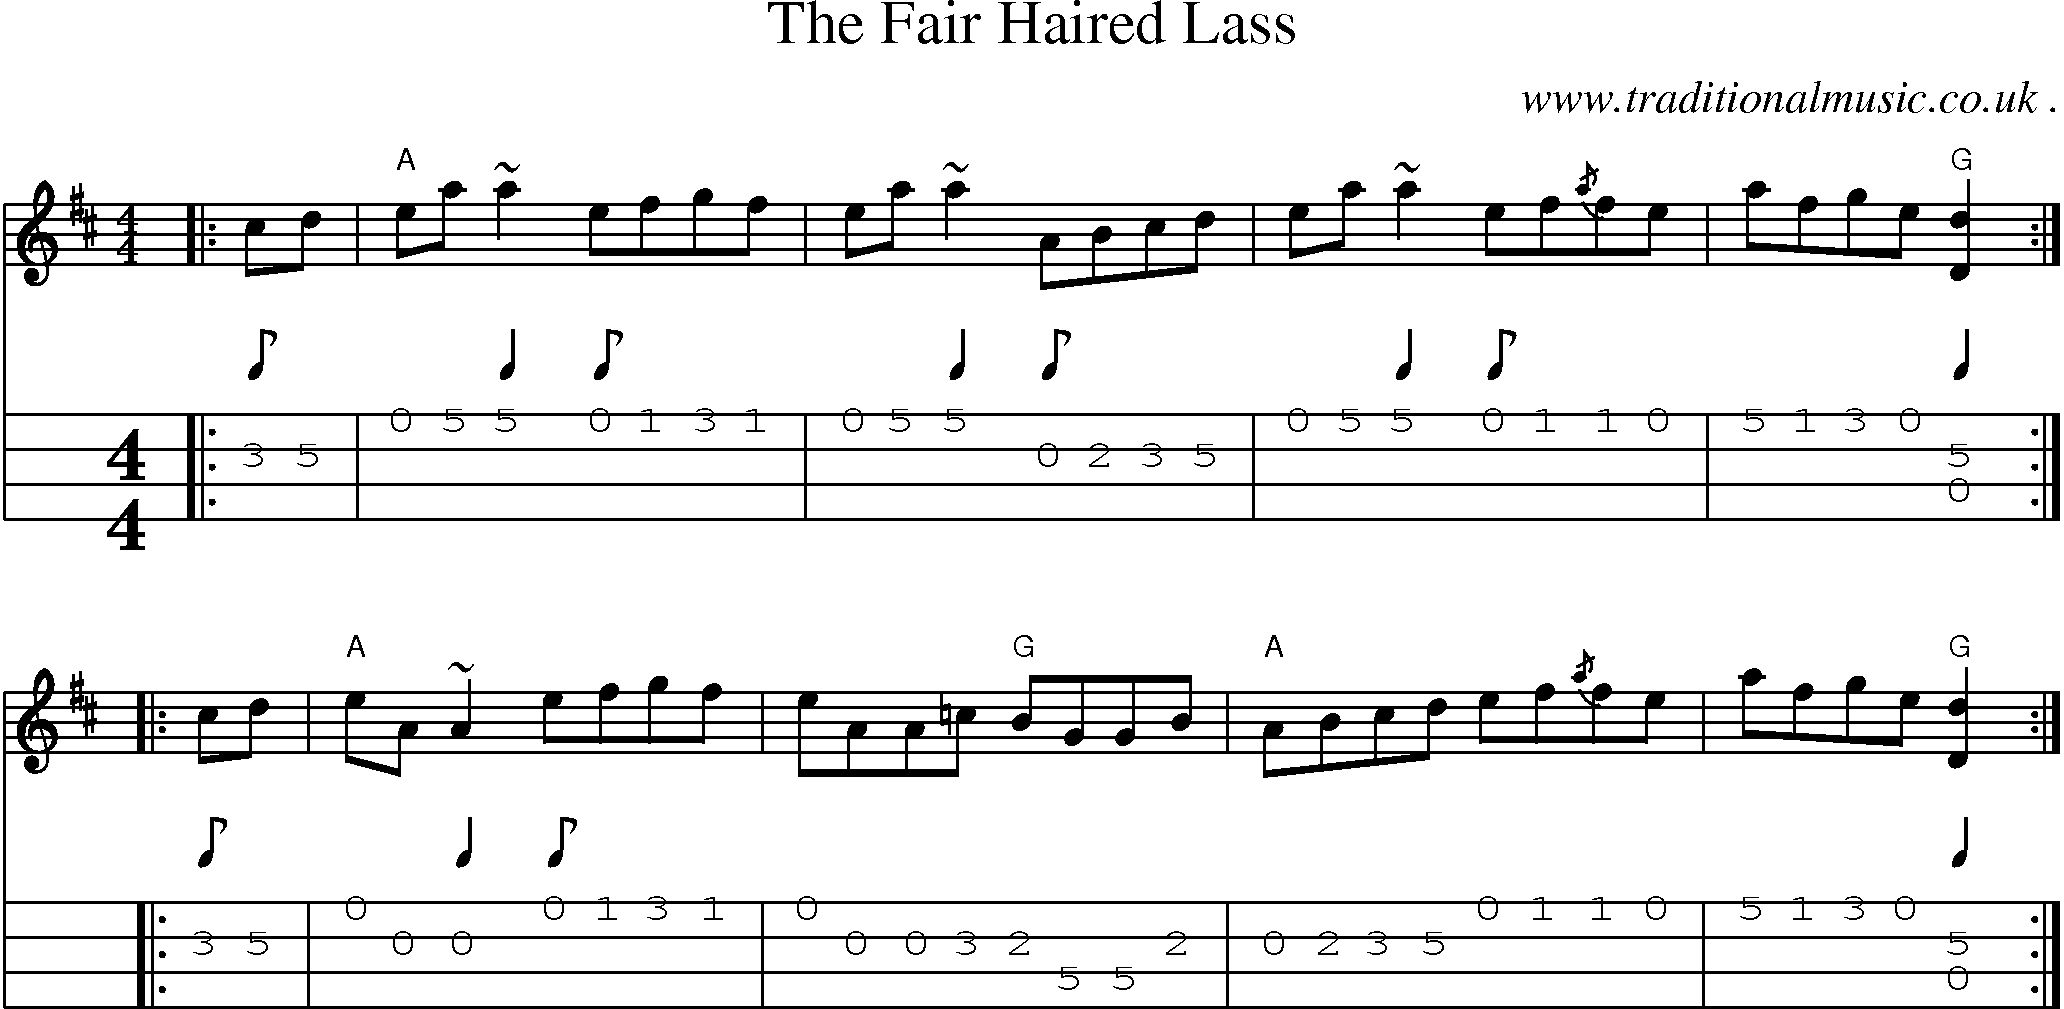 Sheet-music  score, Chords and Mandolin Tabs for The Fair Haired Lass